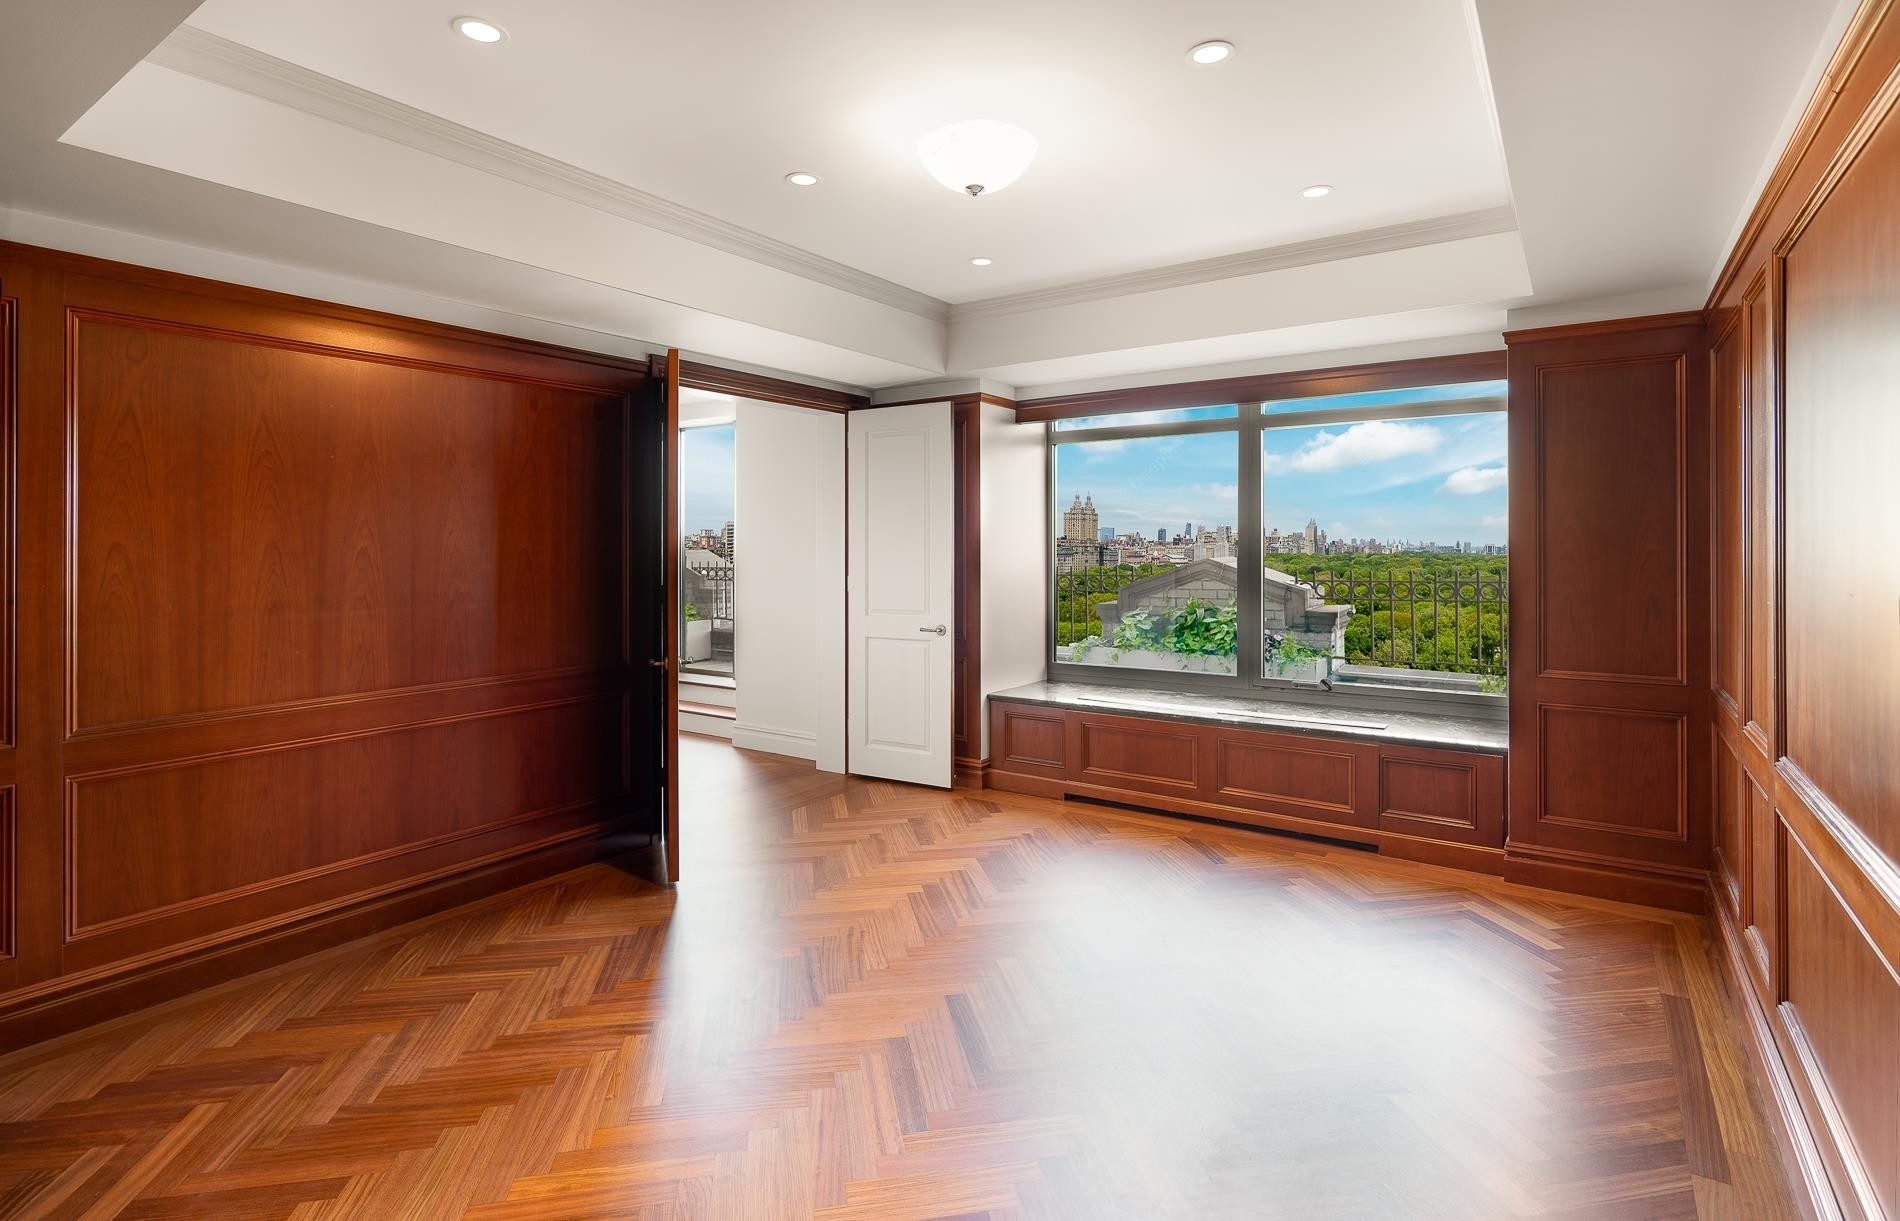 20. Condominiums for Sale at Residences At Ritz-Carlton, 50 CENTRAL PARK S, PH23 Central Park South, New York, NY 10019